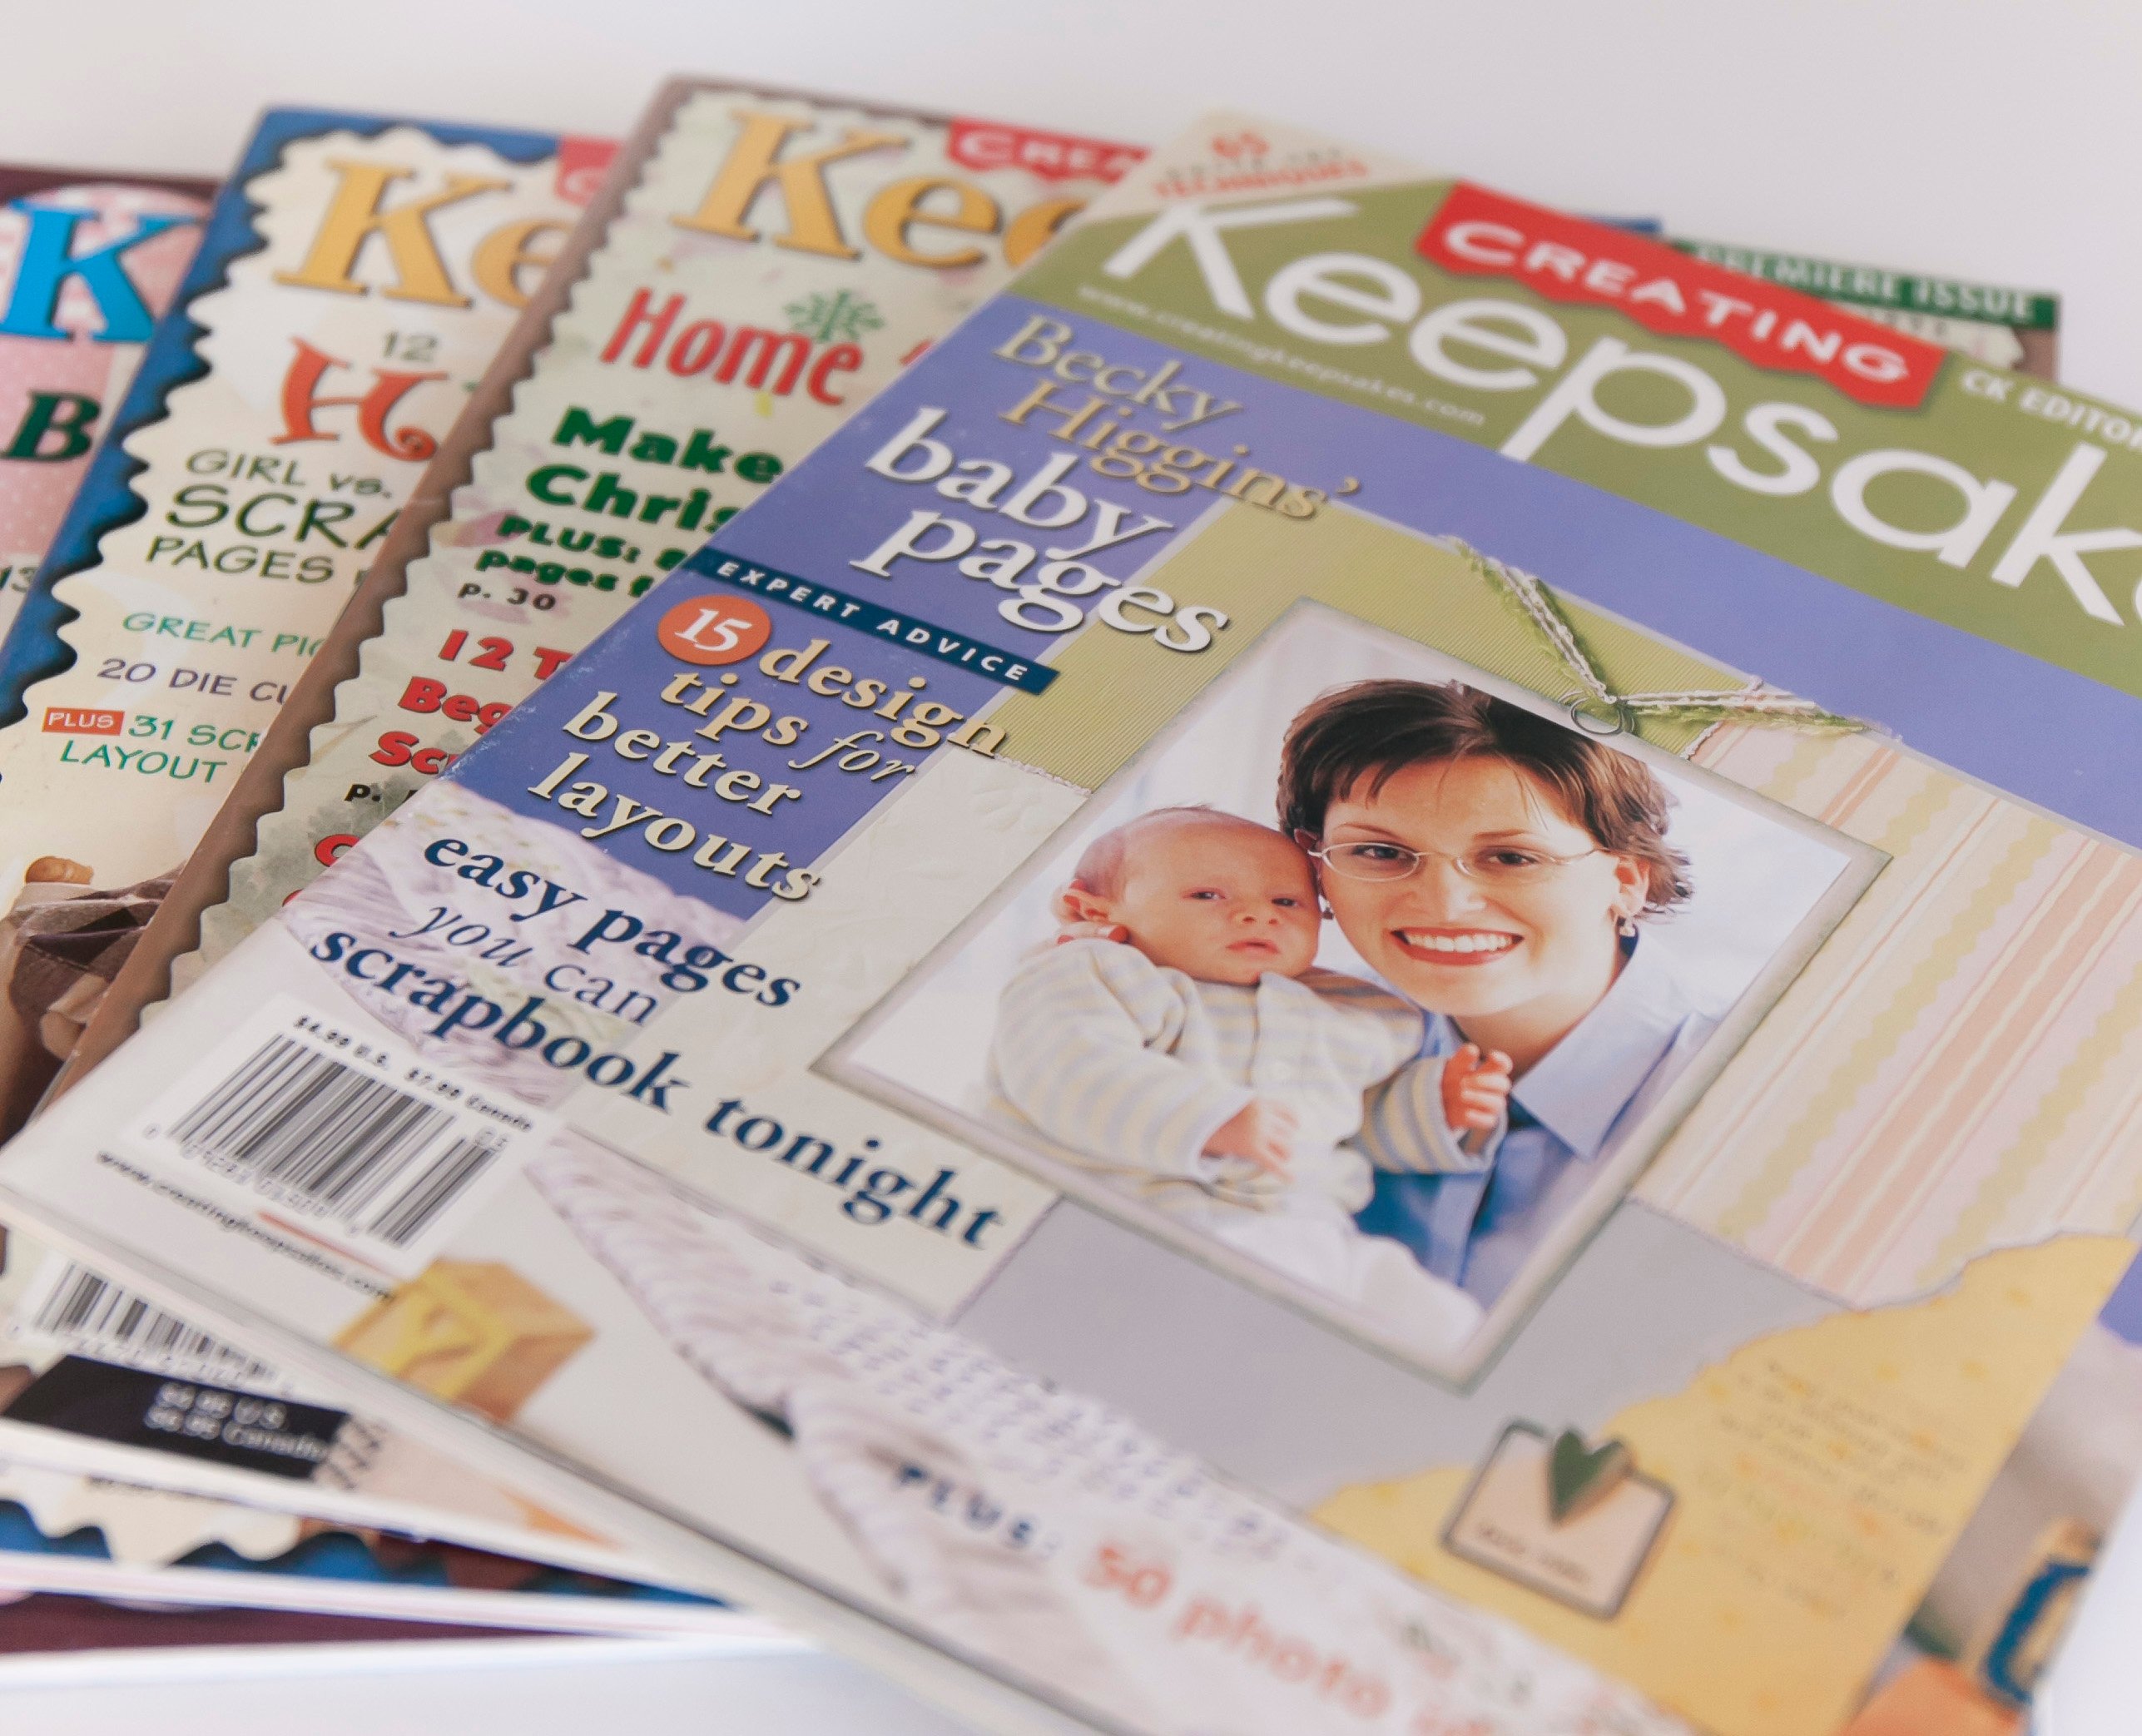 Early issues of Creating Keepsakes Magazine. Top Issue Features Becky Higgins.